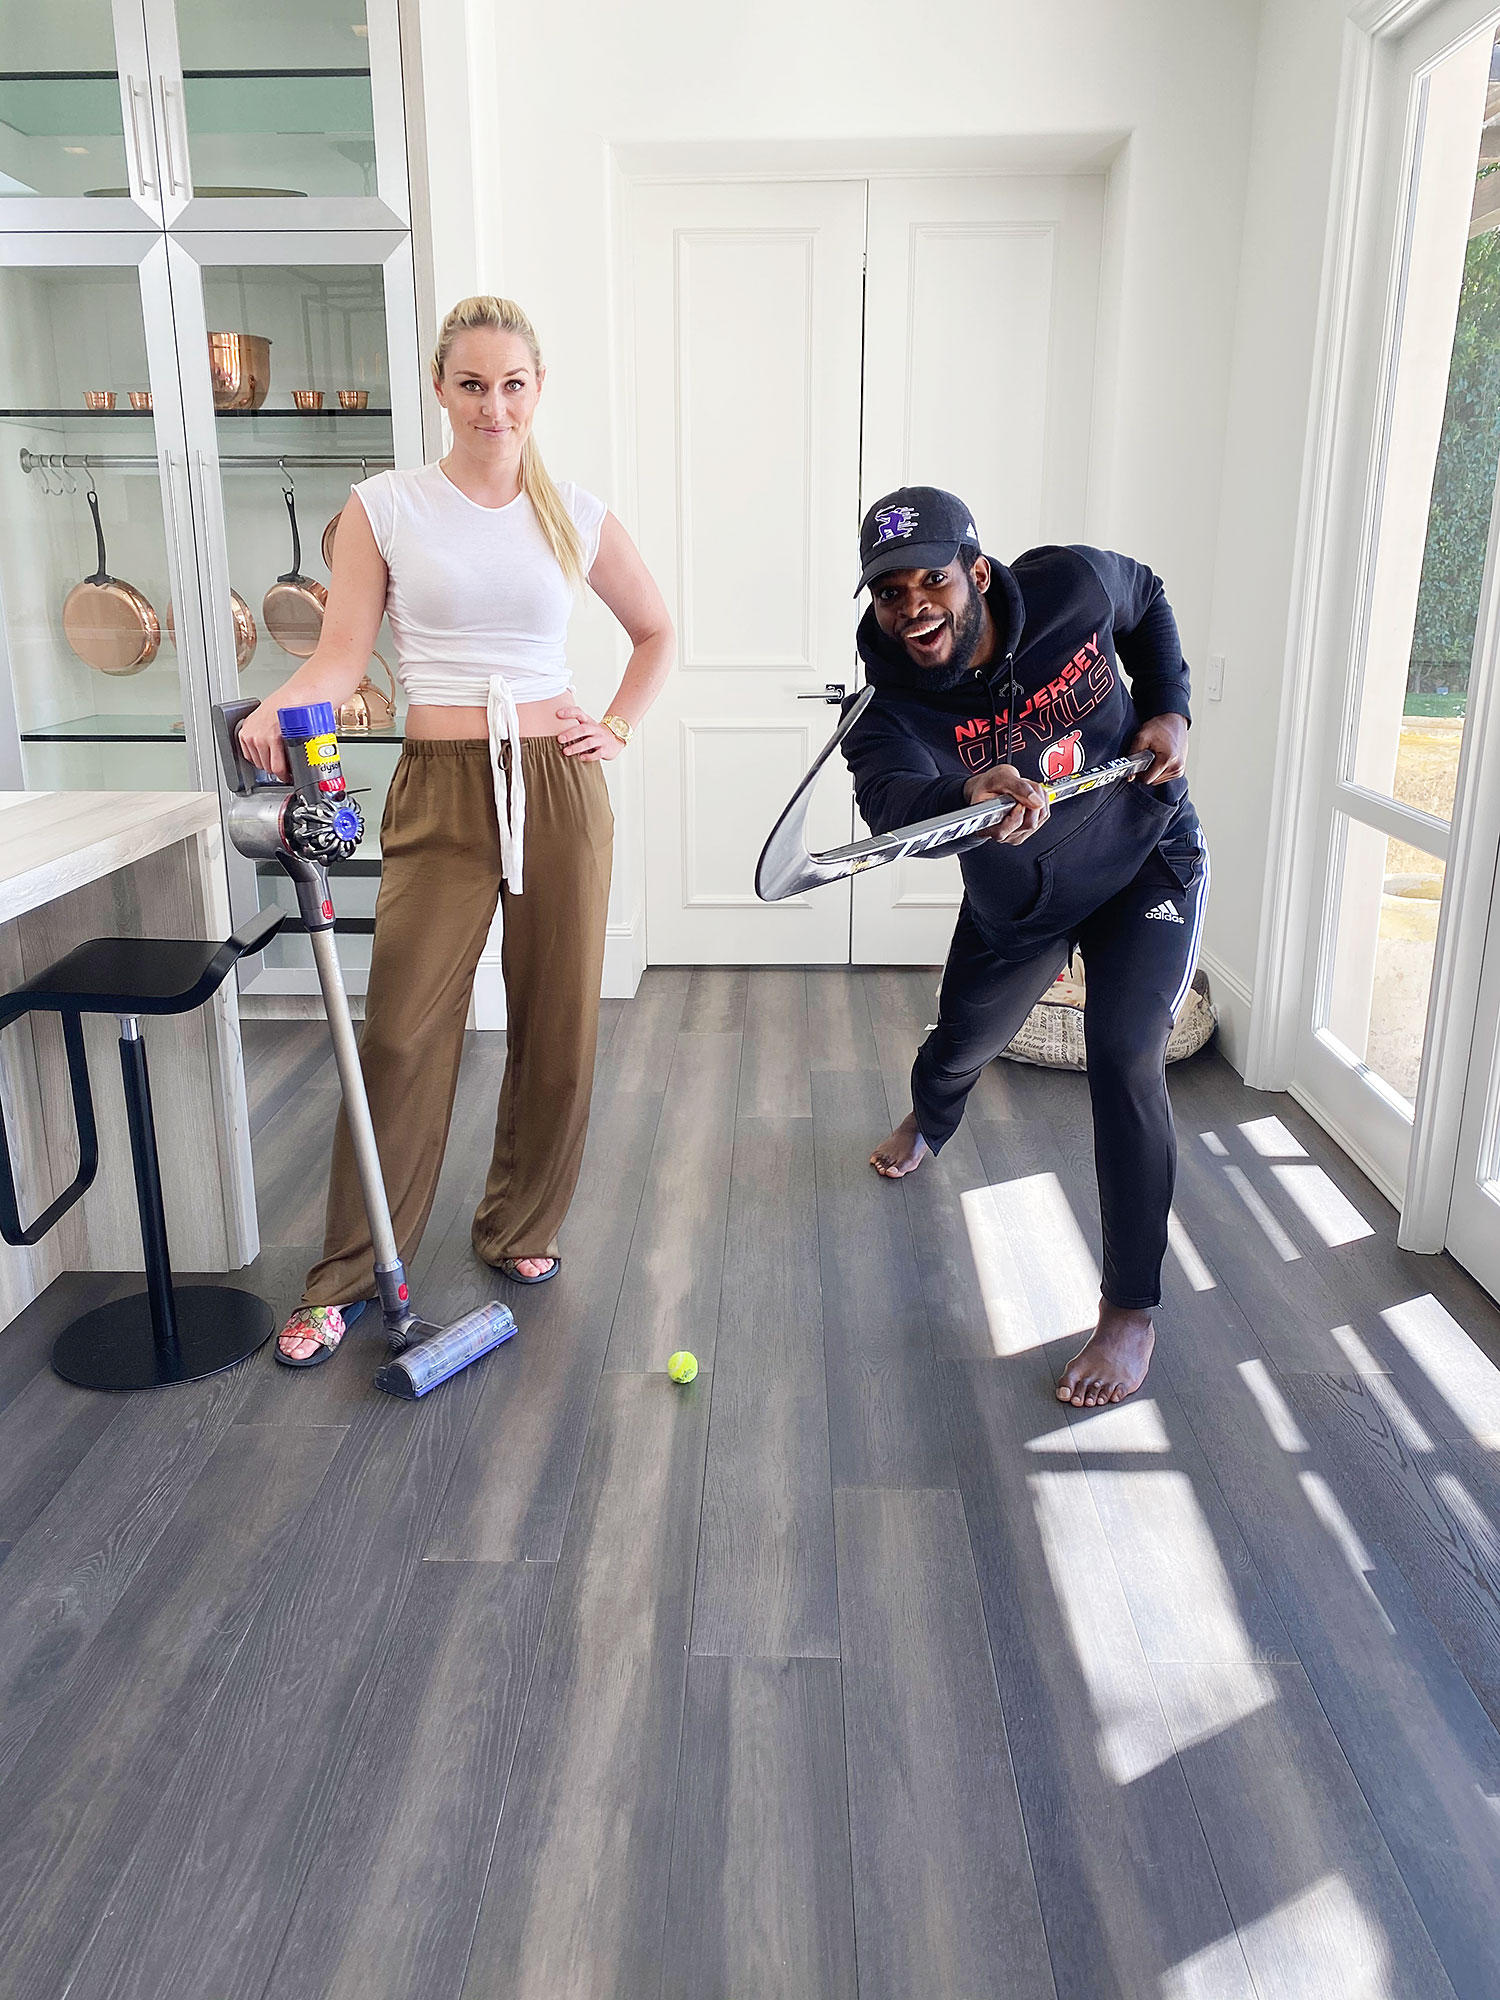 Lindsey-Vonn-and-PK-Subban-How-I-Spend-a-Typical-Day-in-Quarantine-During-the-Coronavirus-Outbreak.jpg